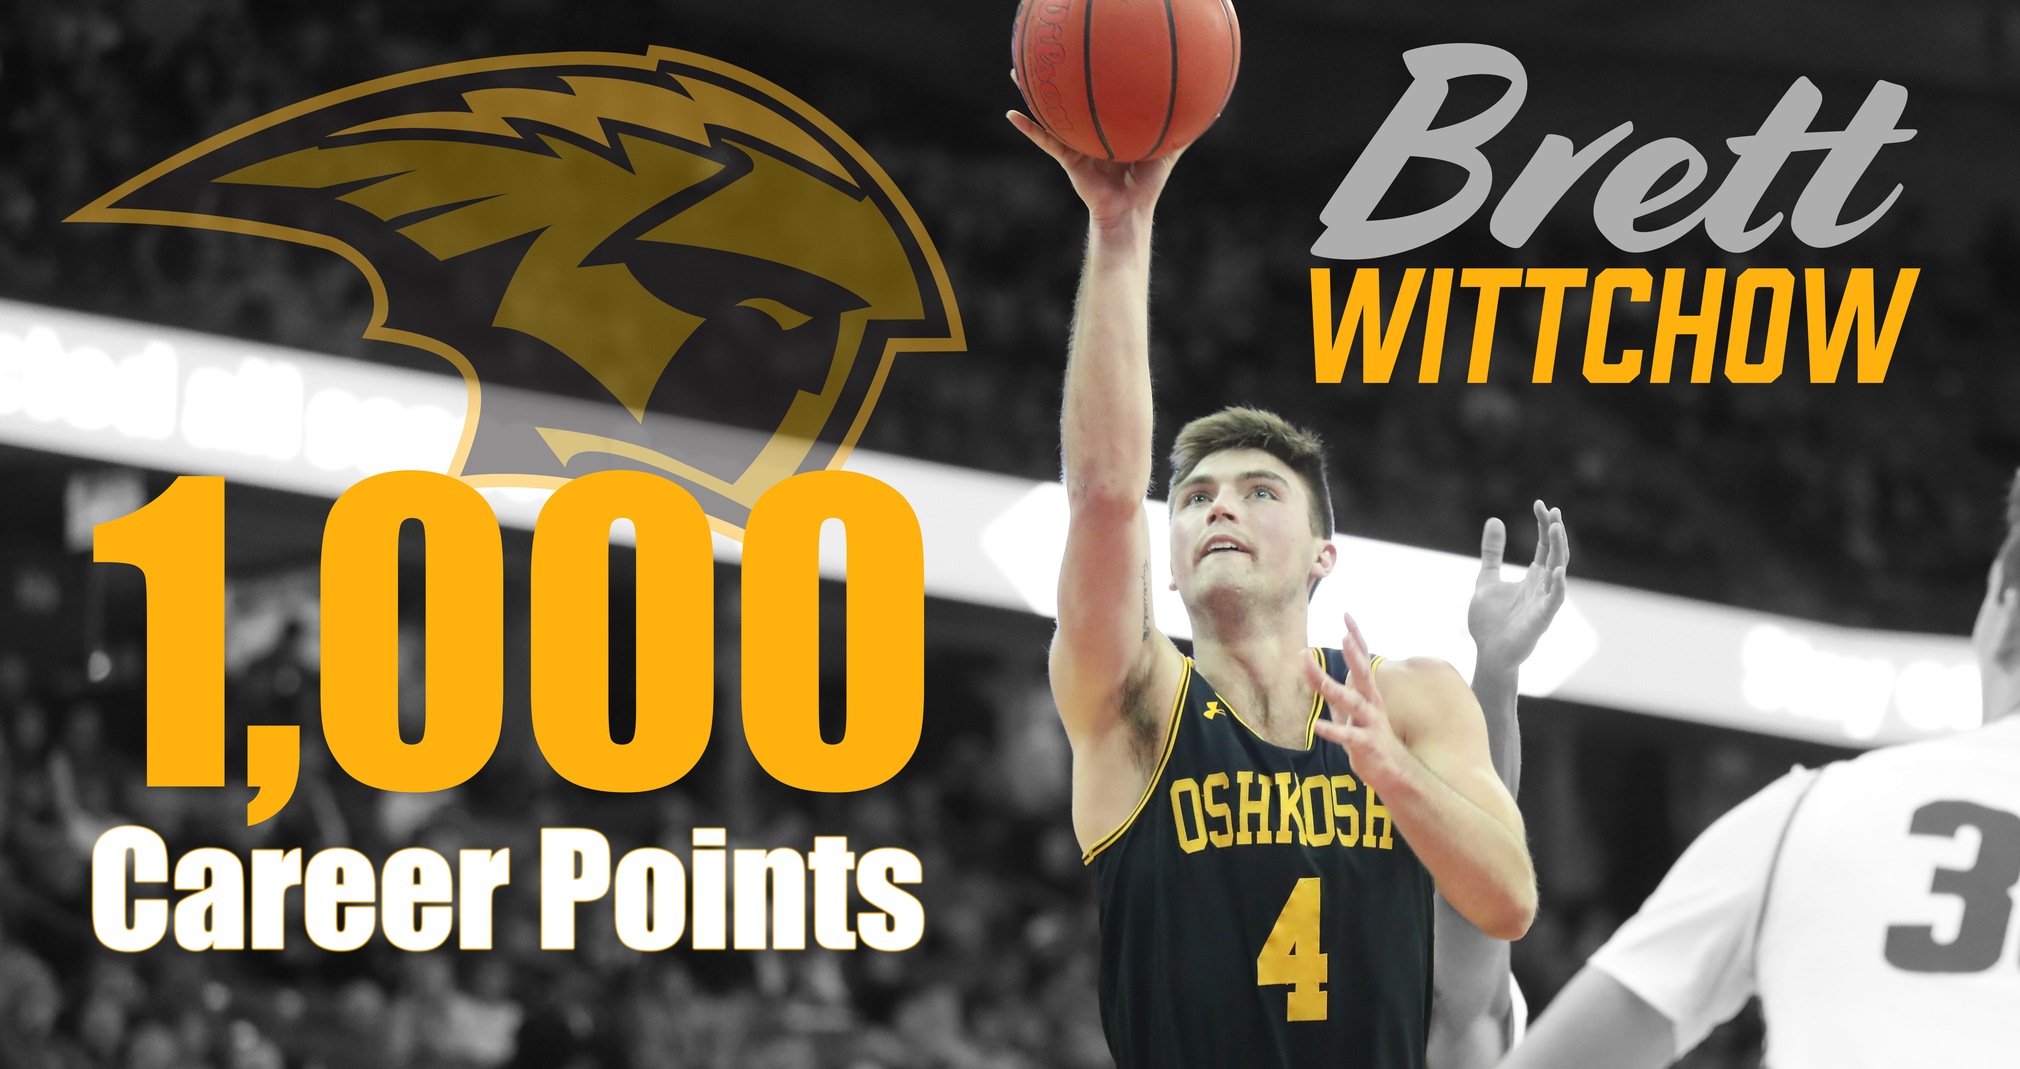 Brett Wittchow scored his 1,000 career point during his 103rd game as a Titan.